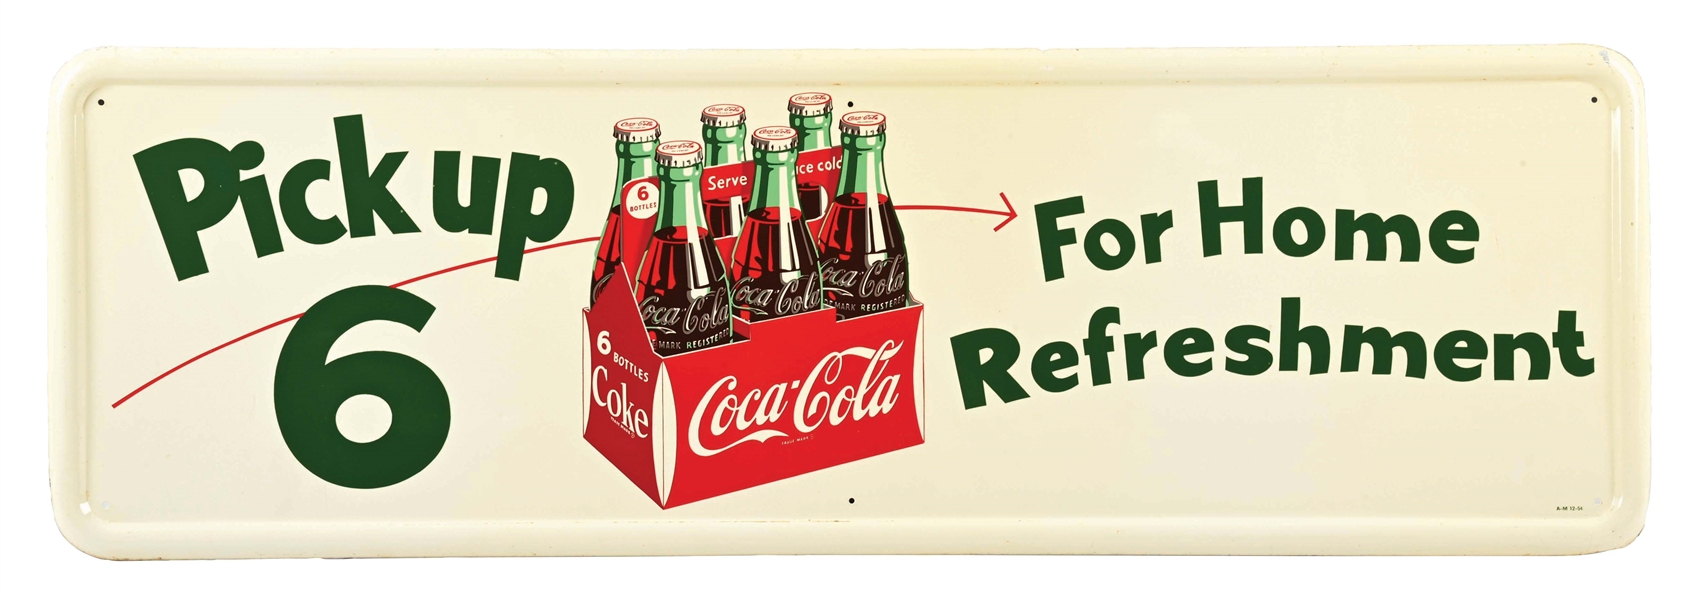 COCA-COLA "PICK UP 6 FOR HOME REFRESHMENT" SELF-FRAMED TIN SIGN W/6 PACK GRAPHIC.